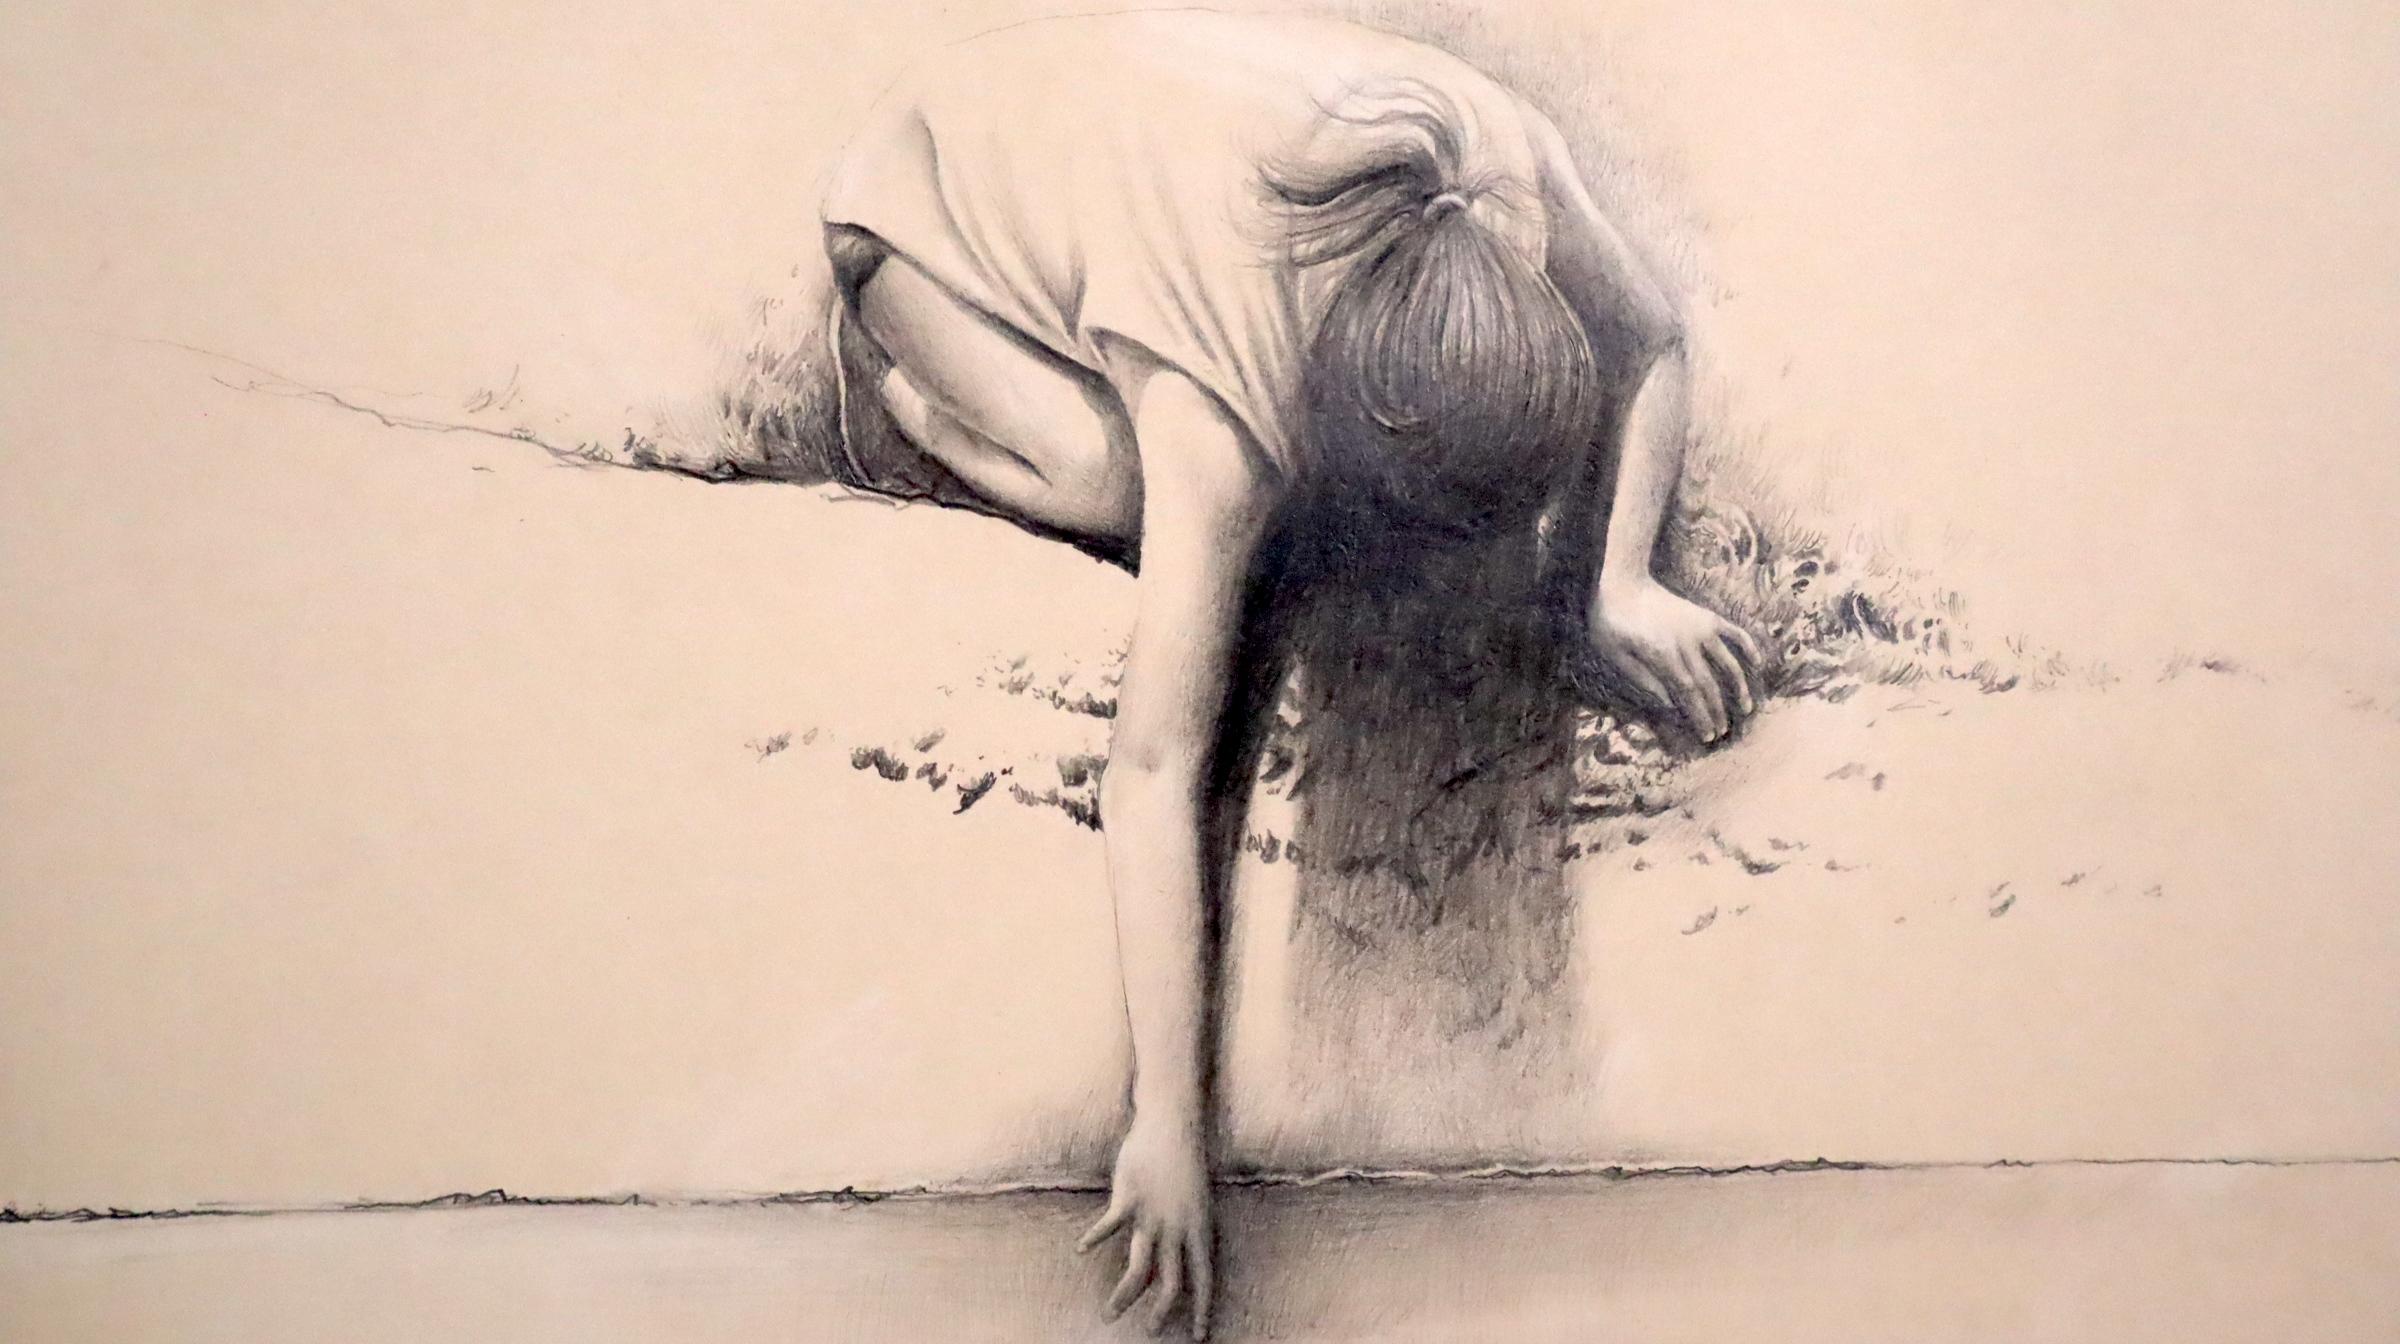 A touching figure study in great detail by the famous landscape artist Woody Gwyn.  Pencil on paper.  Date not known.  Signed lower right.  Taped to mat board.
Image: 10 1/2 x 13/ 1/4 inches; sheet (perforated on one end): 11 x 14 inches; mat board